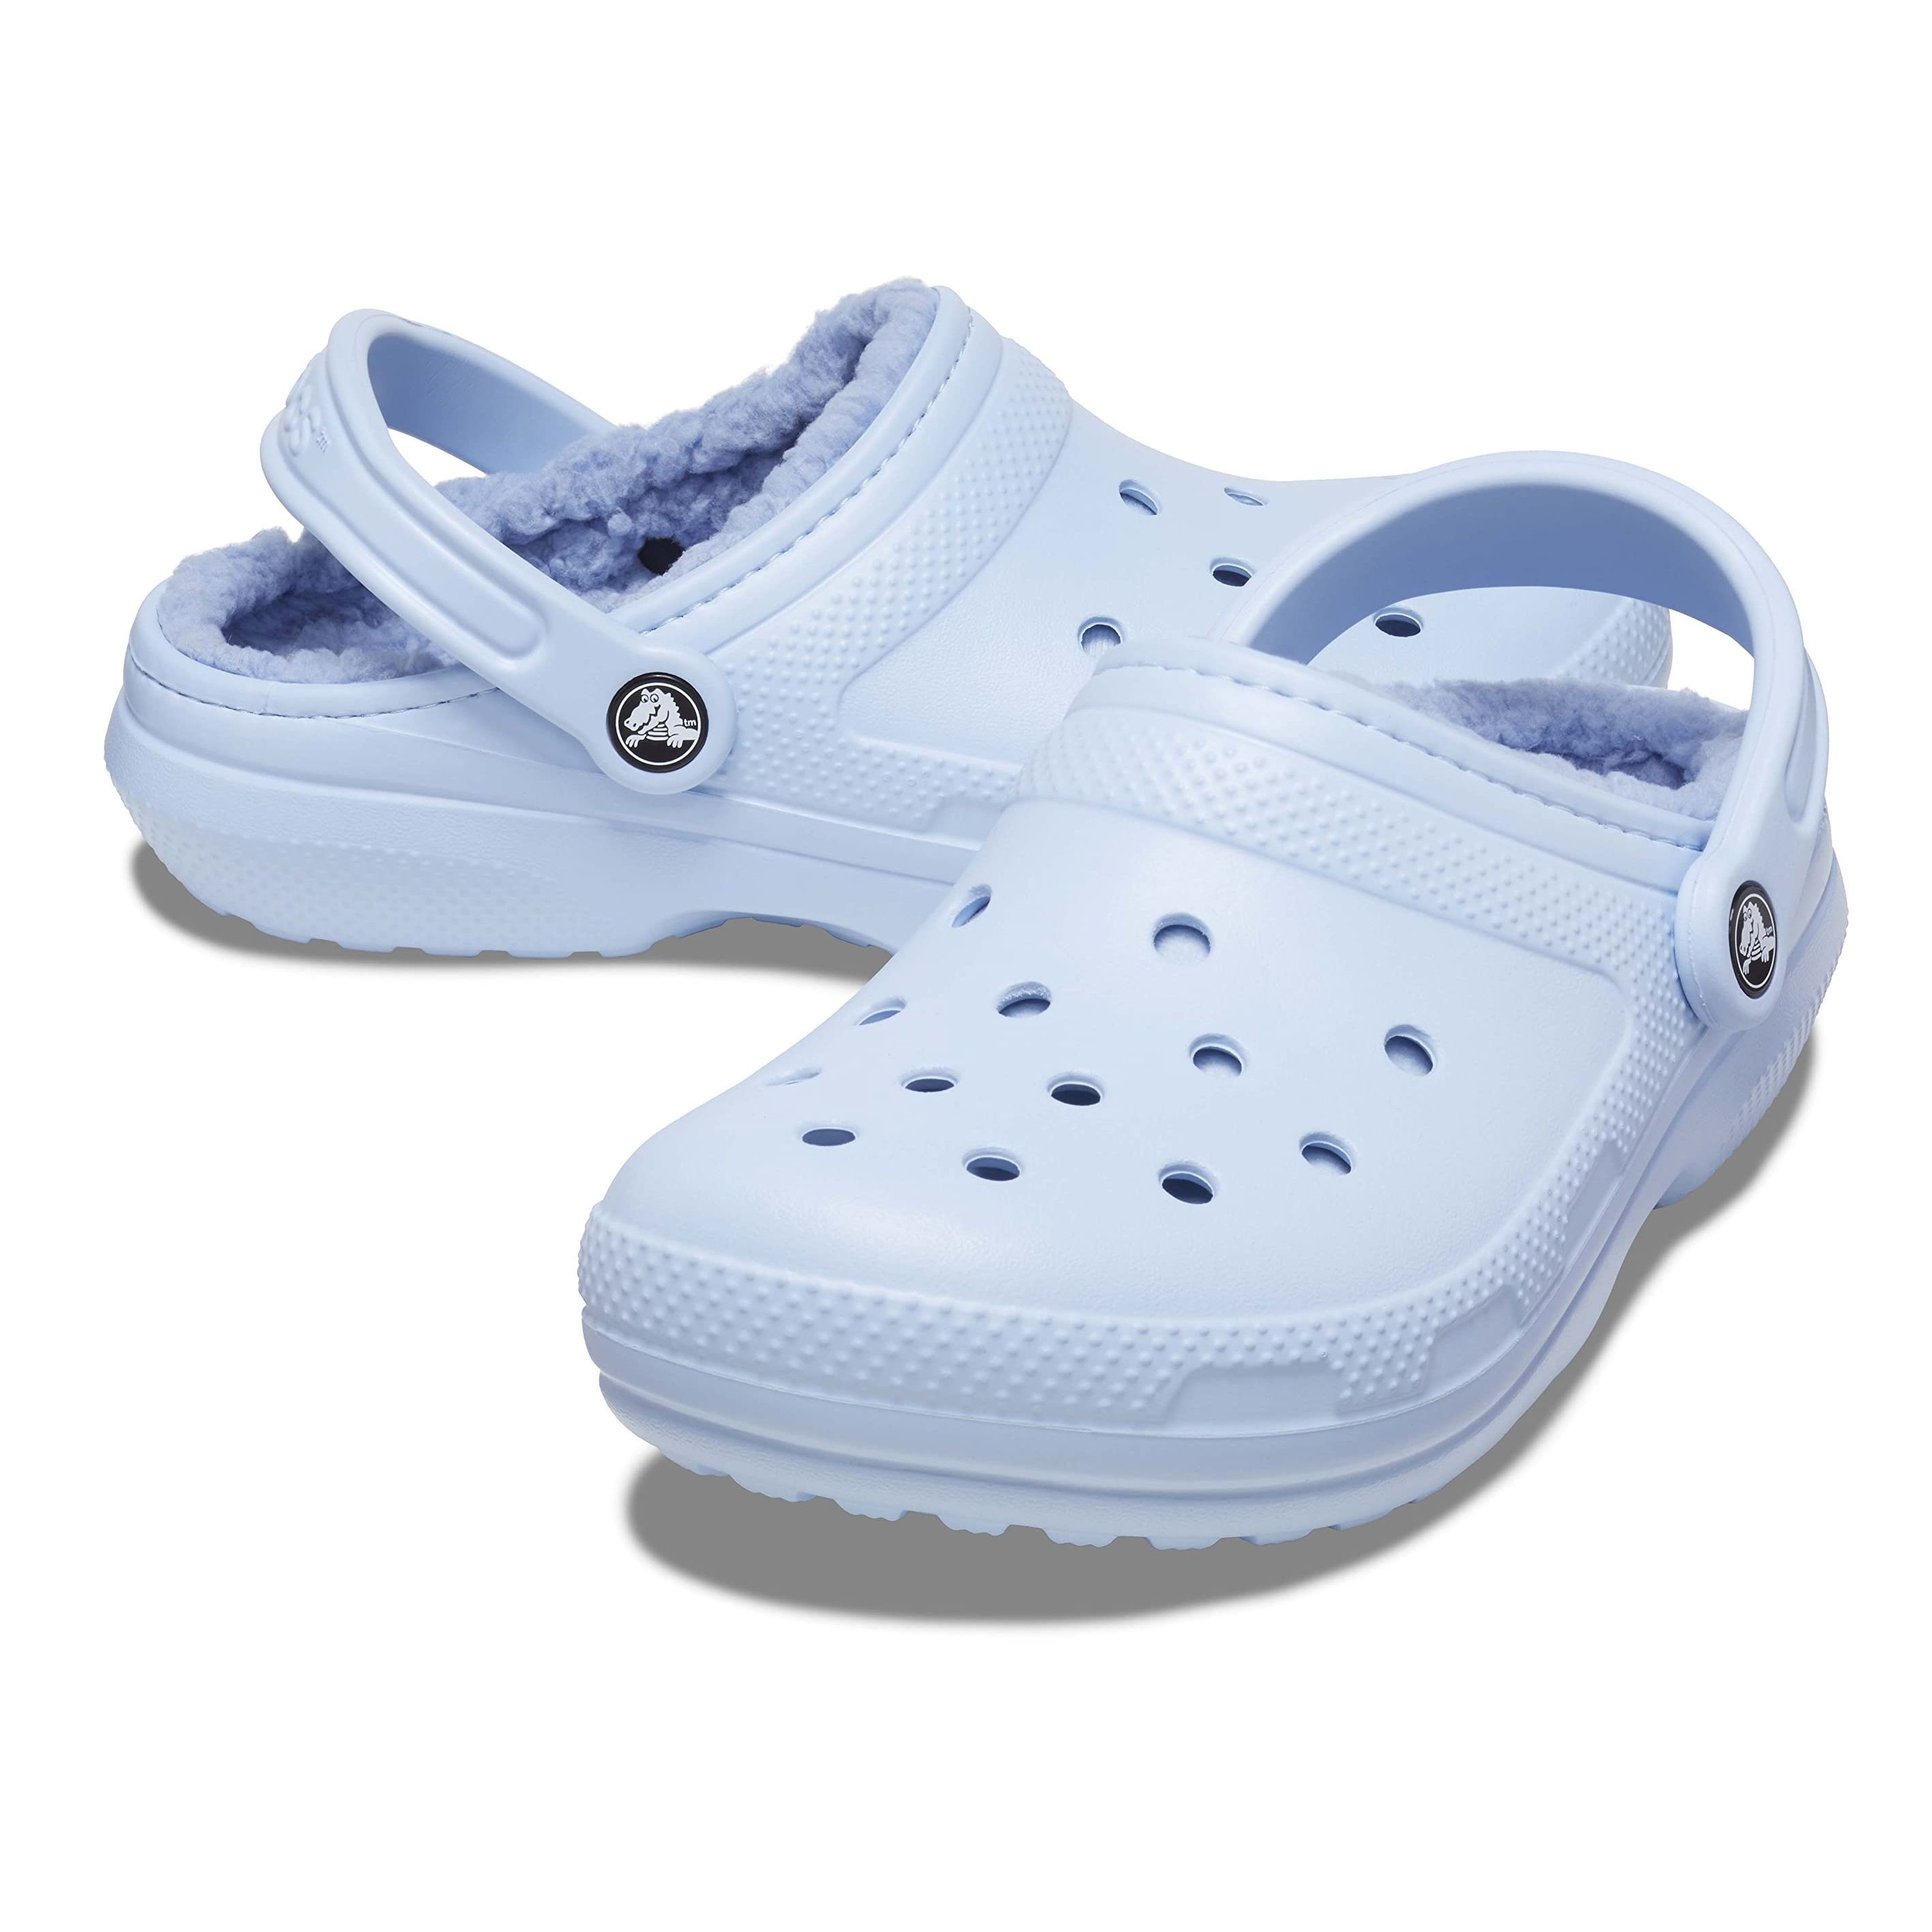 What Podiatrists Want You To Know About Crocs & Your Kid's Feet